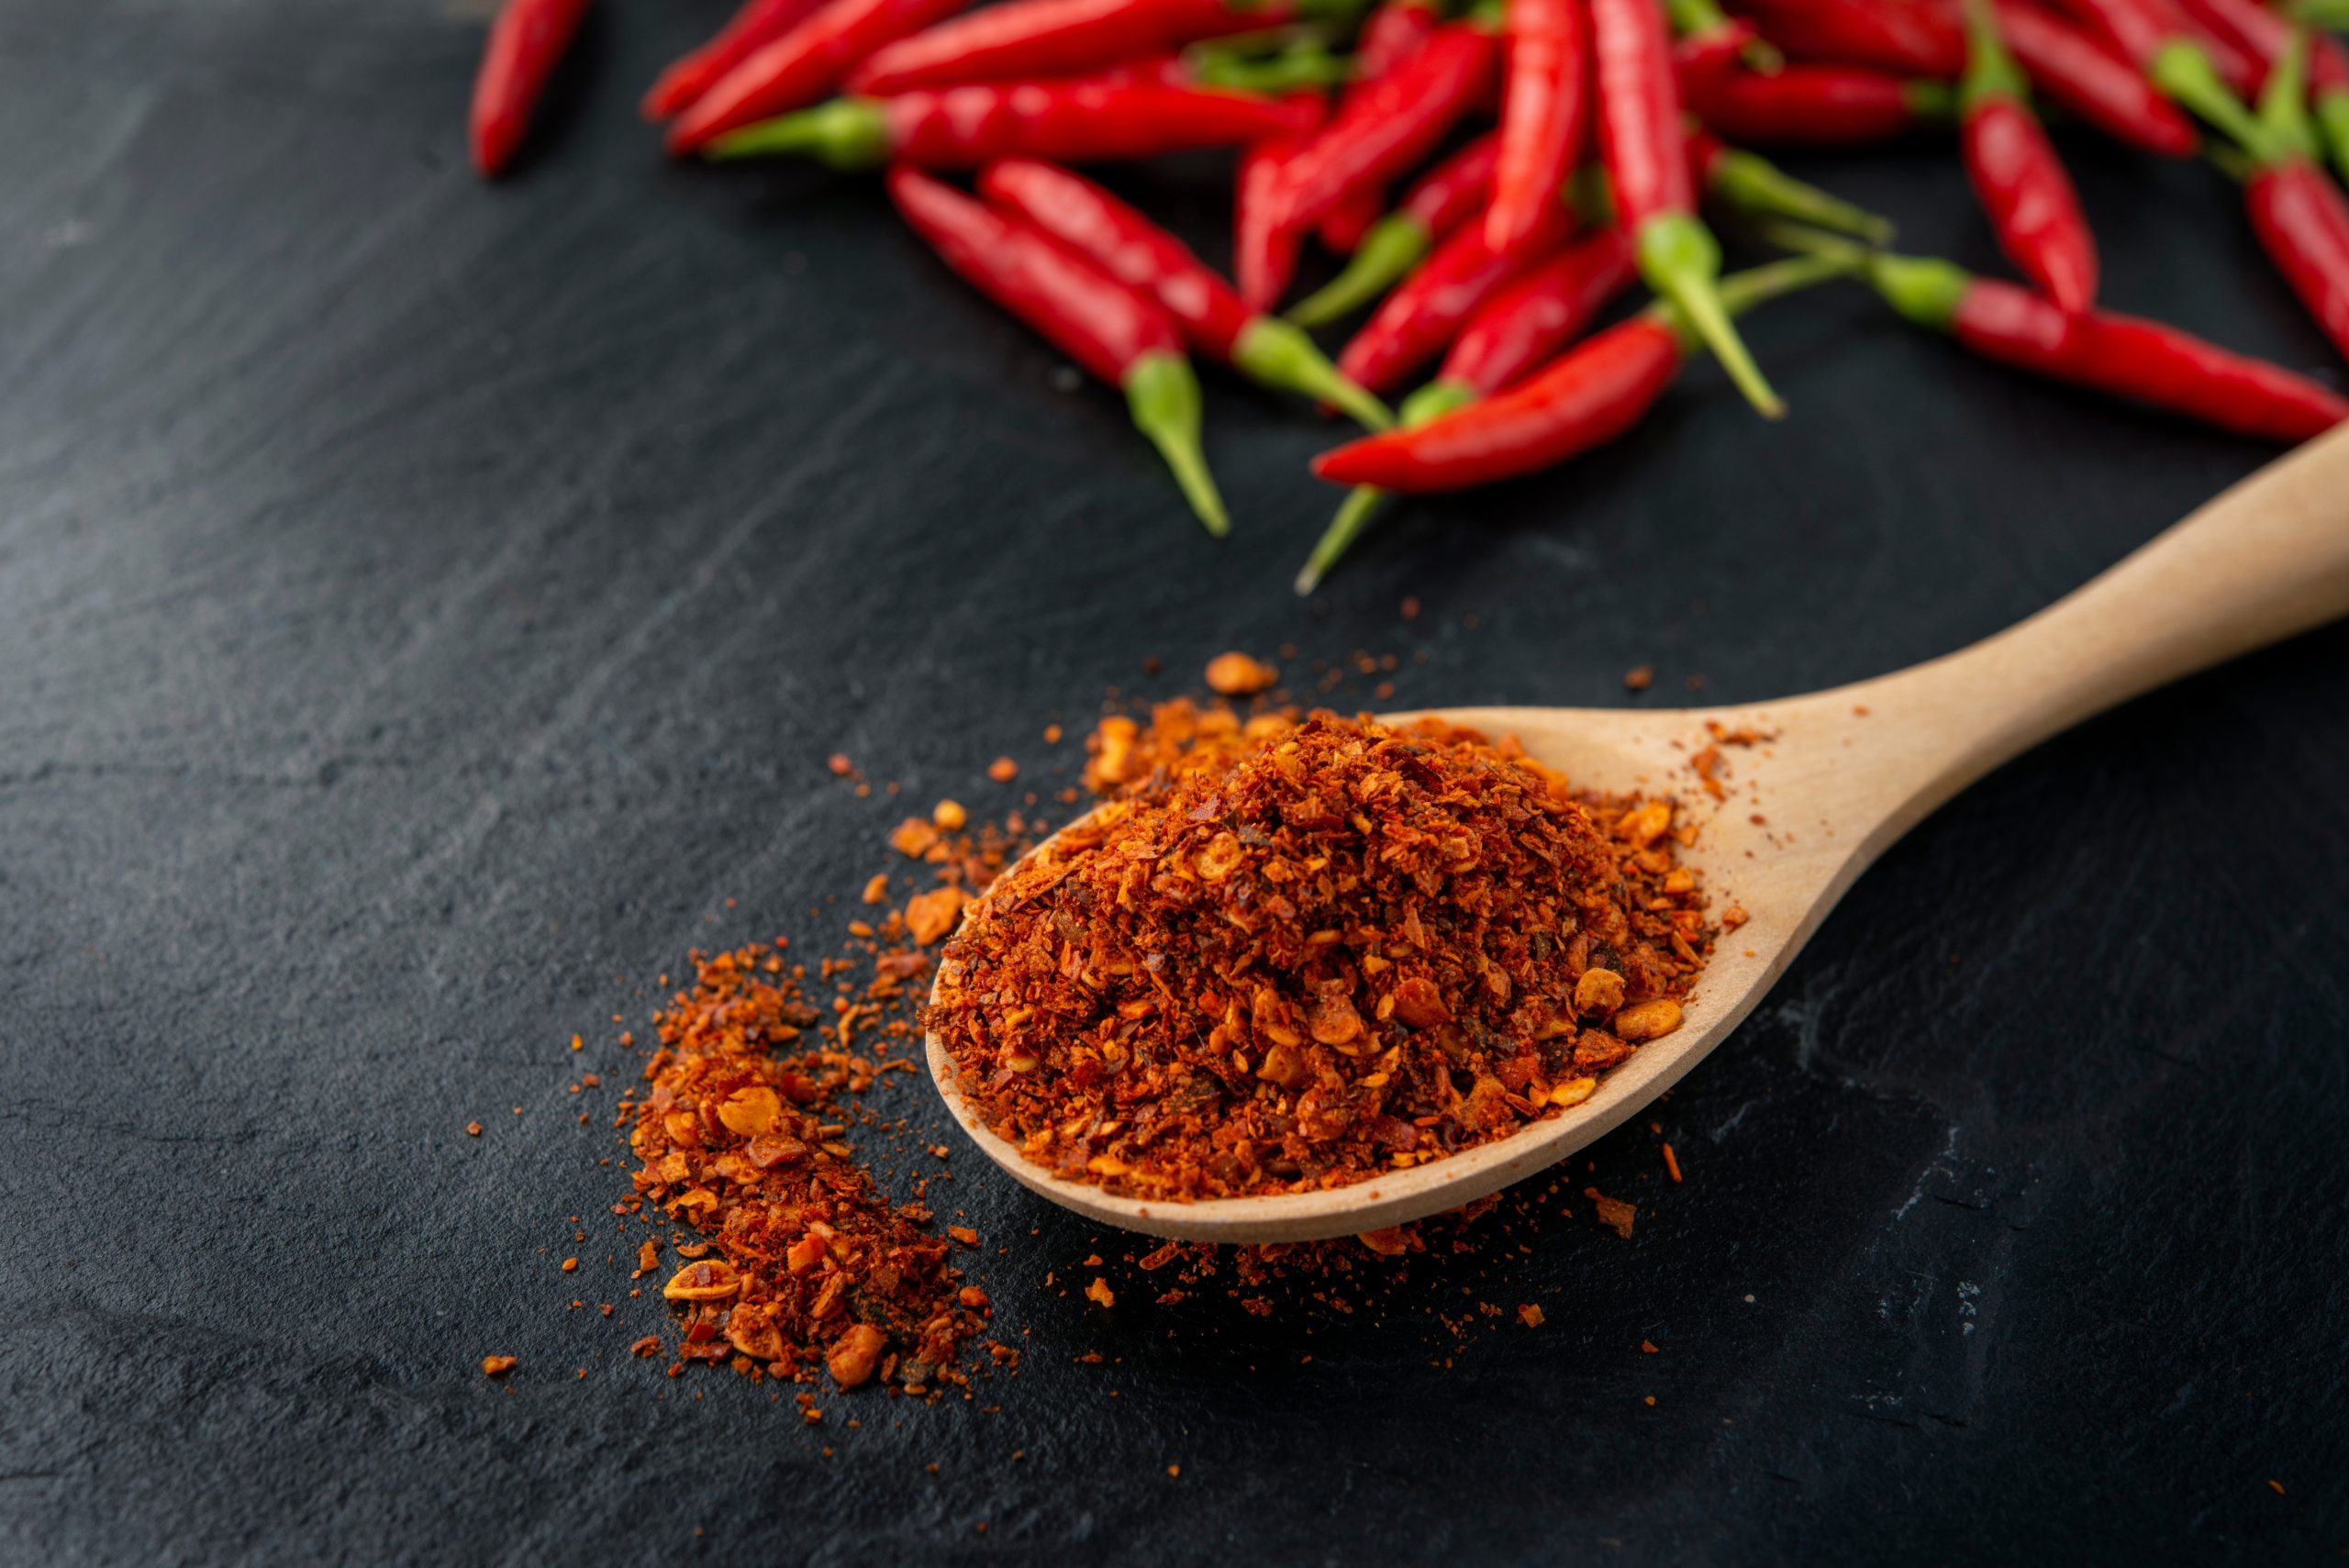 Cayenne pepper extract